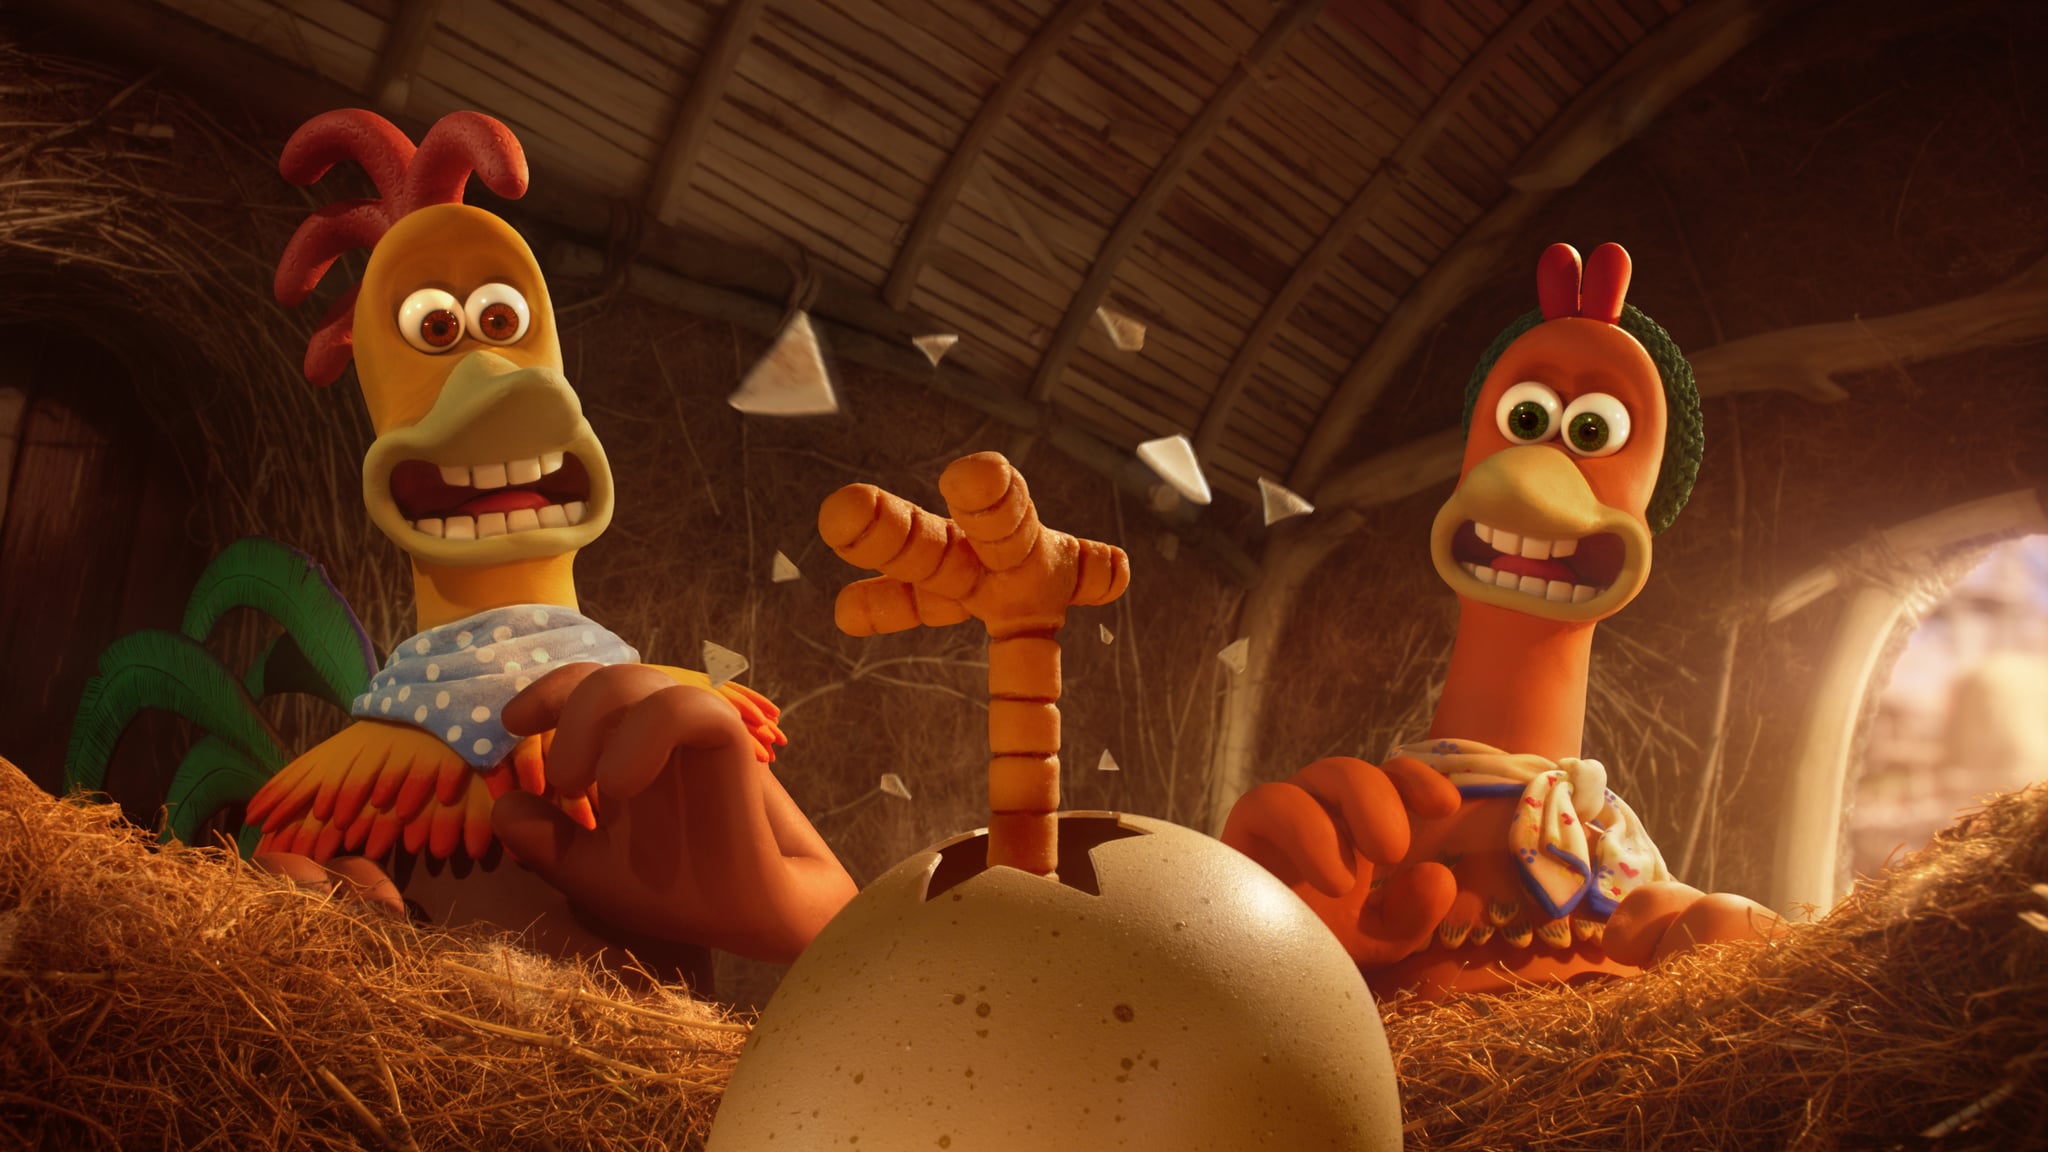 CHICKEN RUN: DAWN OF THE NUGGET - (L to R): Rocky (Zachary Levi) and Ginger (Thandiwe Newton) are back, in CHICKEN RUN: DAWN OF THE NUGGET - the eagerly anticipated sequel to Aardman's hit film, CHICKEN RUN. CHICKEN RUN: DAWN OF THE NUGGET will make its debut only on Netflix in 2023.CHICKEN RUN: DAWN OF THE NUGGET will make its debut only on Netflix in 2023. Cr: Aardman/NETFLIX © 2022